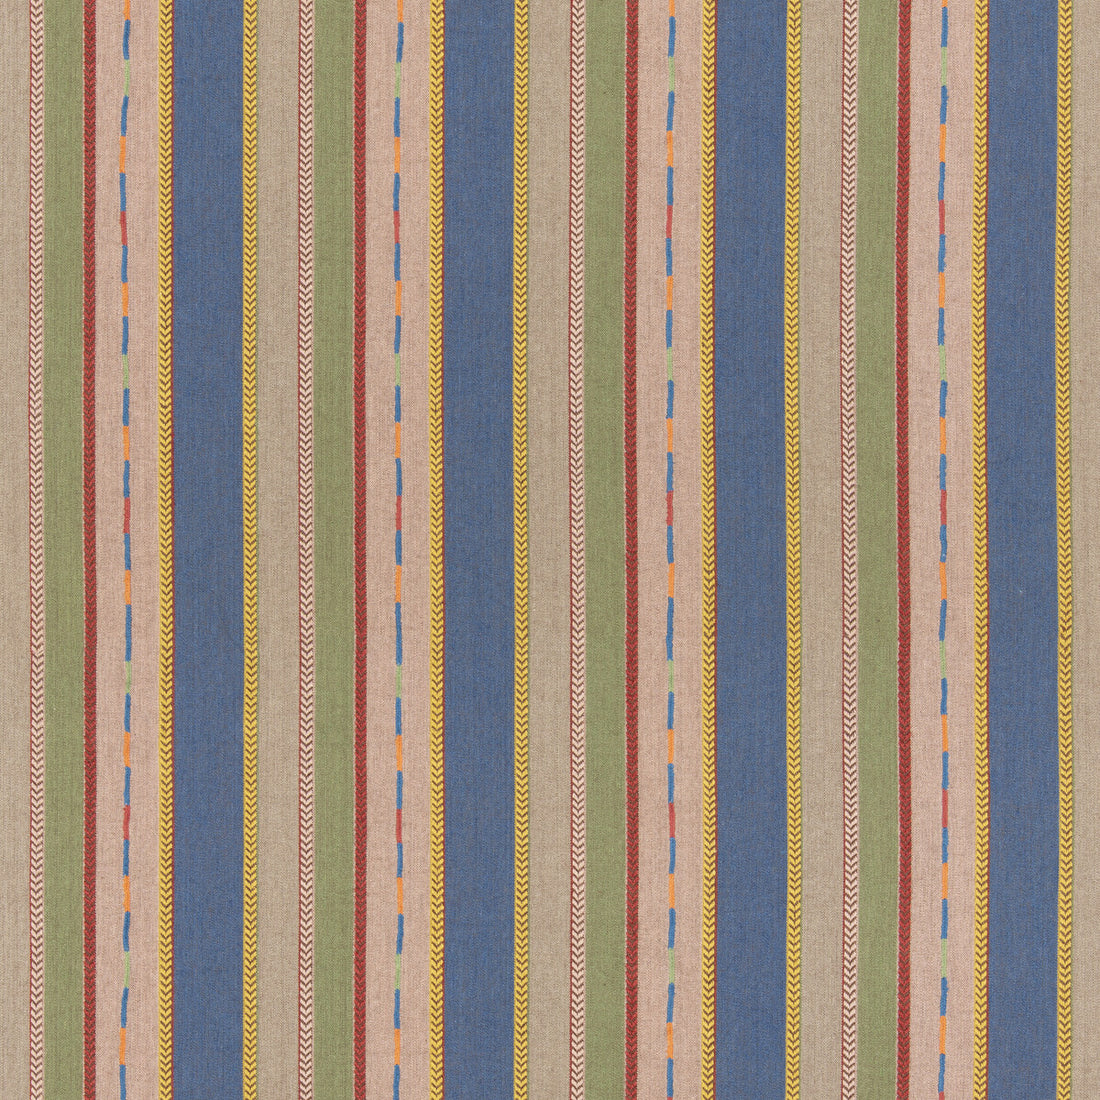 Bunty fabric in blue/green color - pattern BF11062.4.0 - by G P &amp; J Baker in the X Kit Kemp Stripes collection